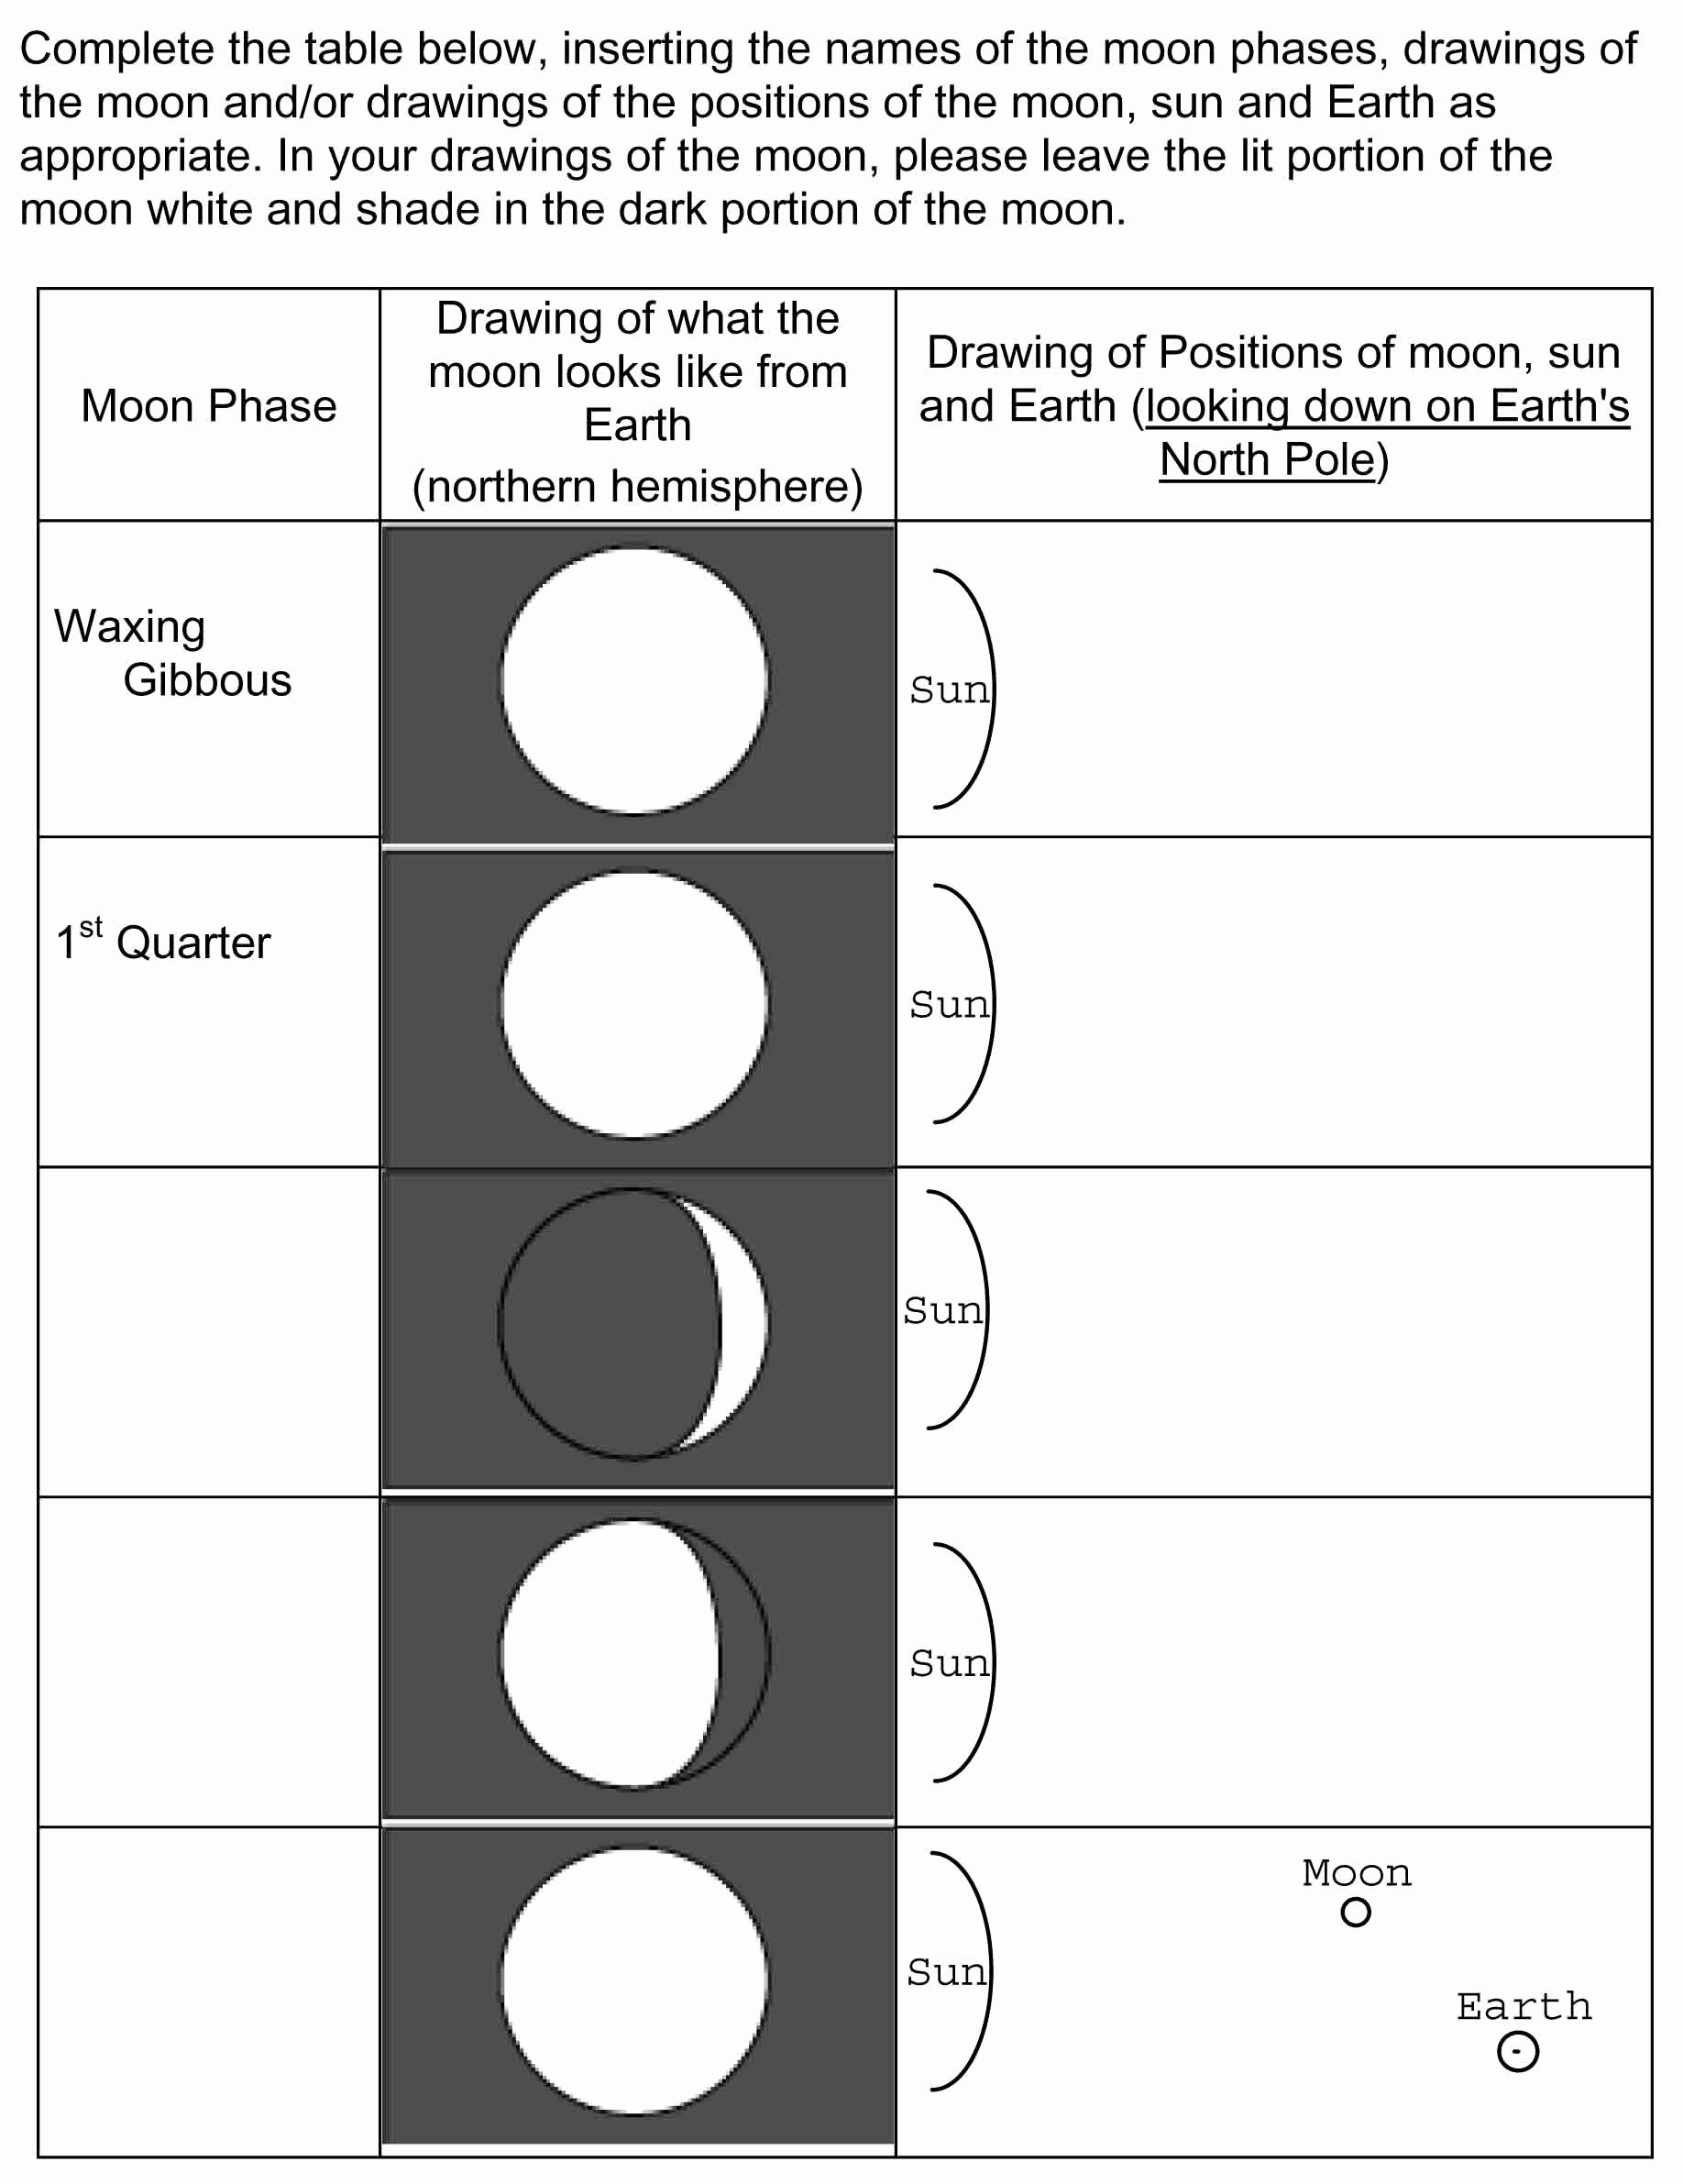 Moon Phases Worksheet Answers Inspirational Phases and Eclipses Of the Moon